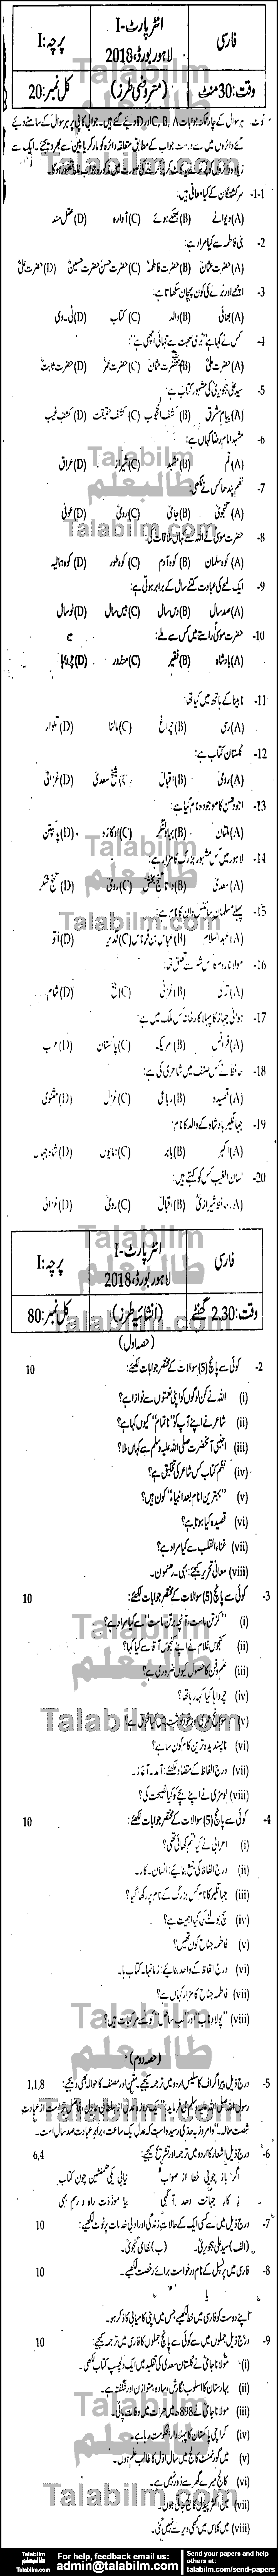 Persian 0 past paper for Group-I 2018